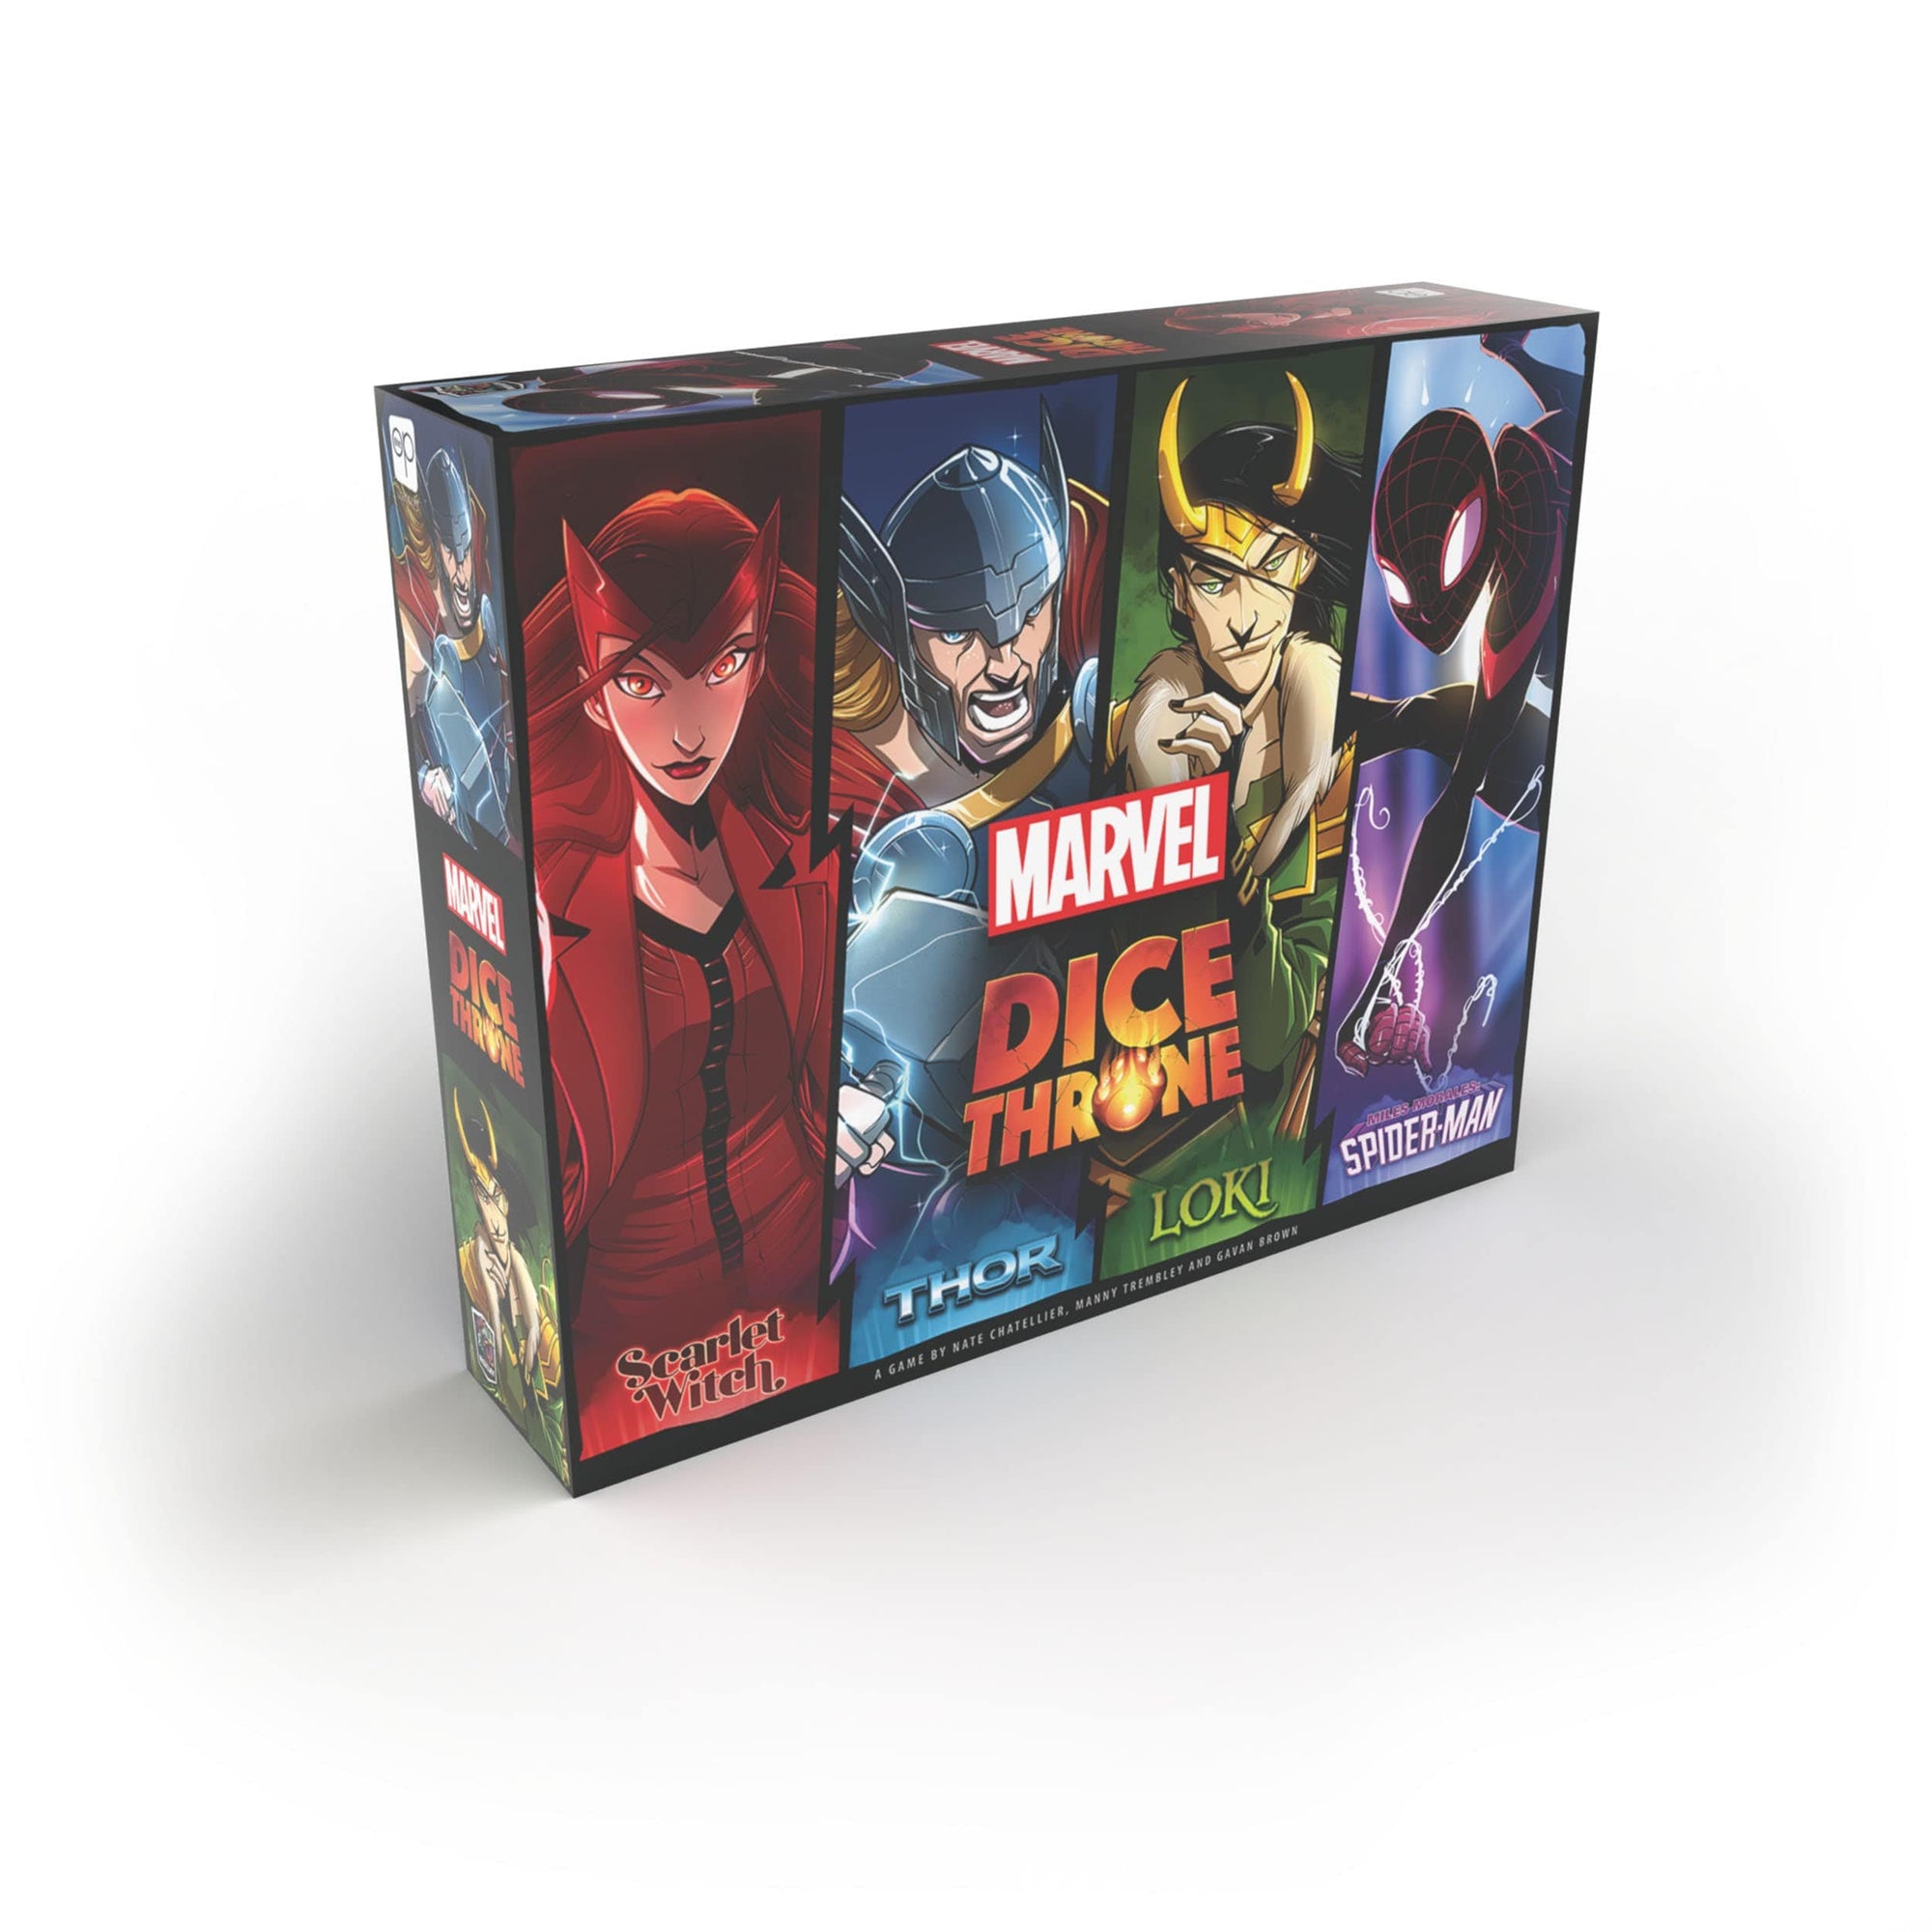 Usaopoly Board Games Marvel Dice Throne: 4-Hero Box (Scarlet Witch, Thor, Loki, and Spider-Man)